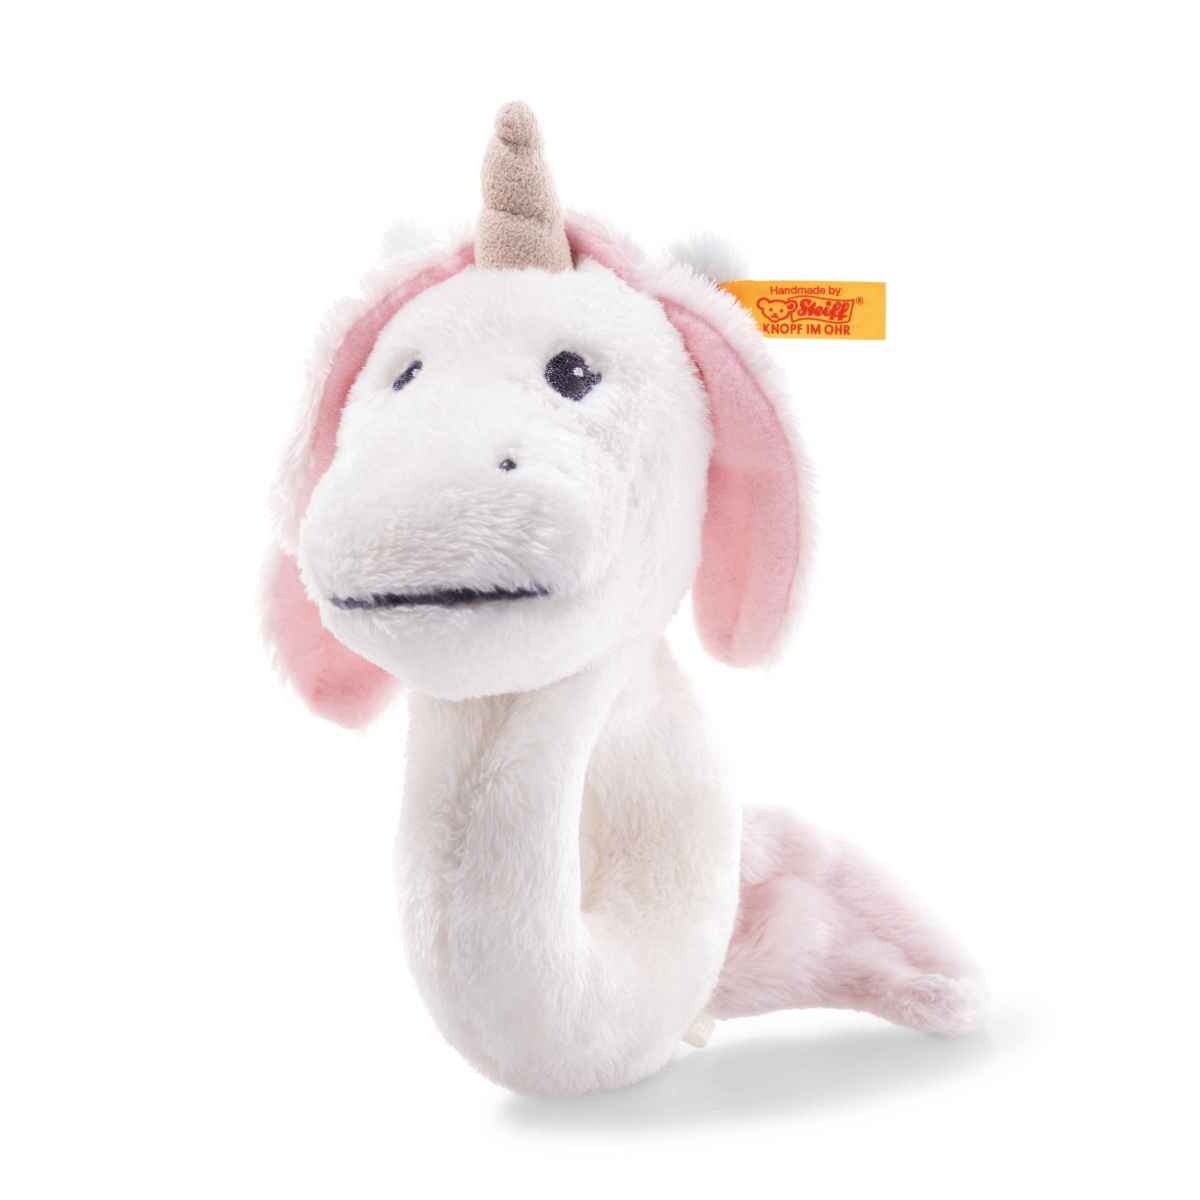 Погремушка Steiff Soft Cuddly Friends Unica Babe unicorn grip toy with rattle Штайф Малыш 1pc luggage handle plastic pull handle grip with mounting screws replacement parts for luggage suitcase box